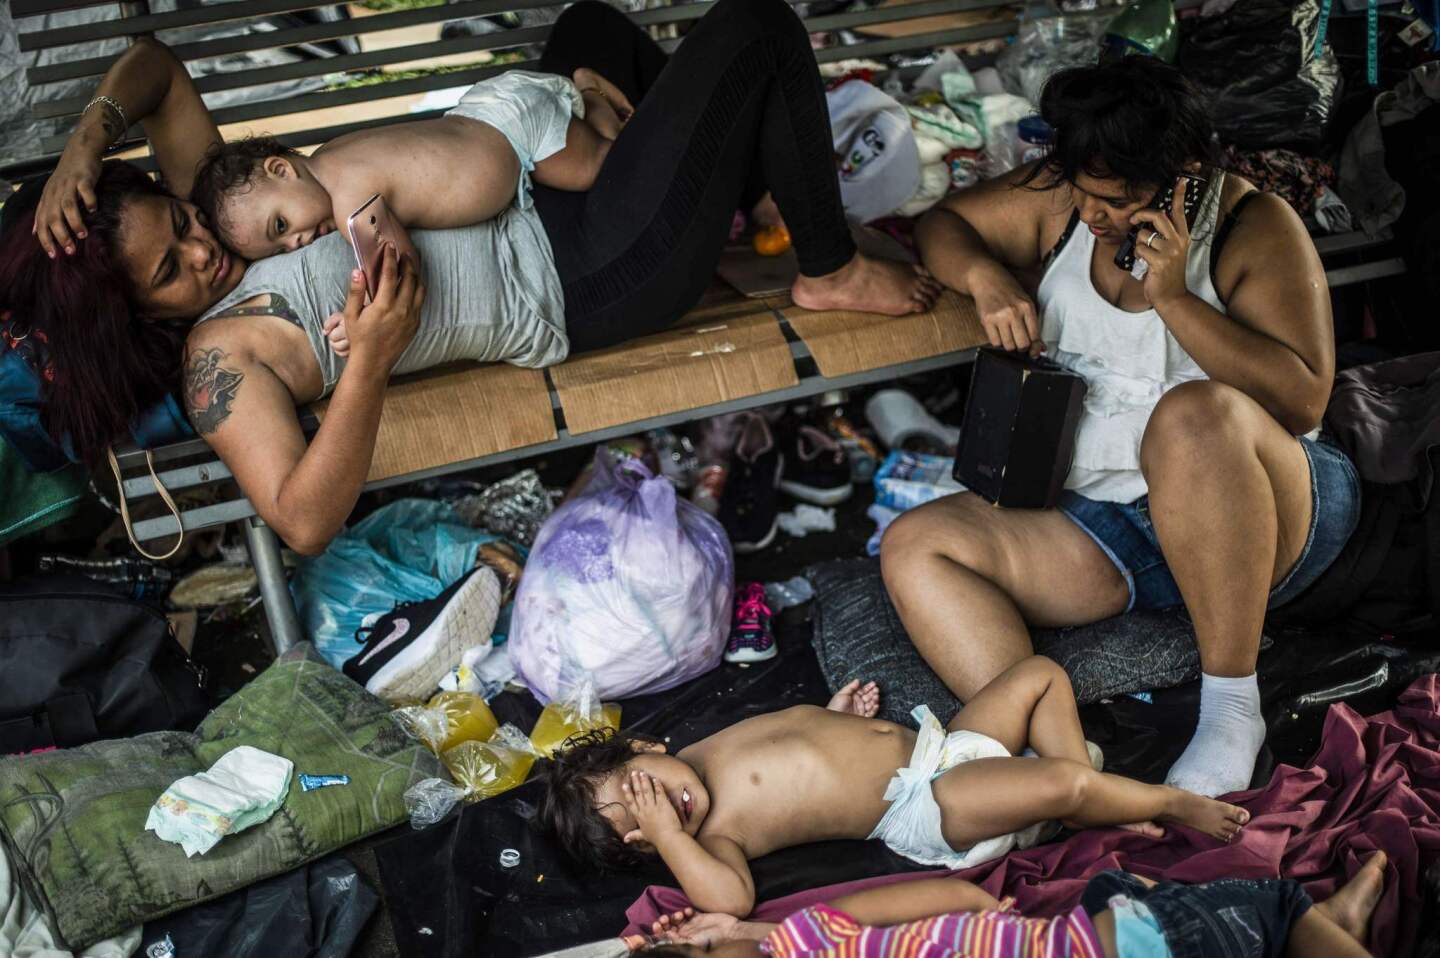 Honduran migrants taking part in a caravan heading to the U.Ss, rest at a makeshift camp during a stop in Huixtla, Mexico.